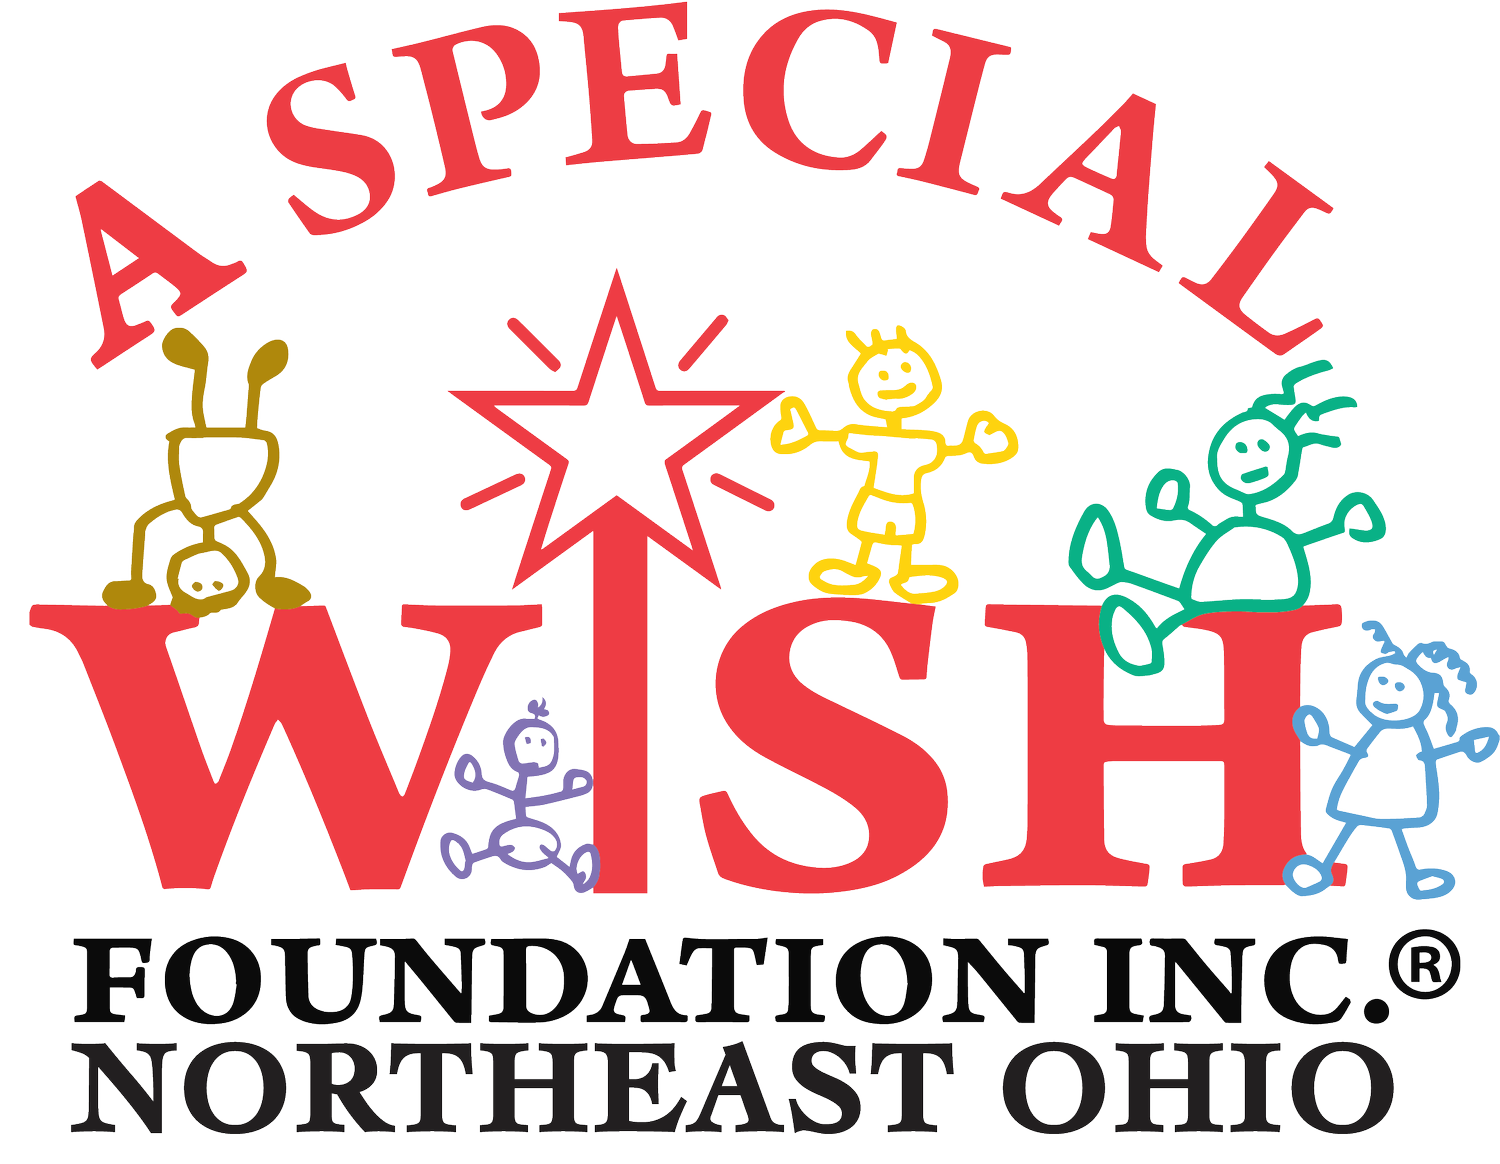 A Special Wish Northeast Ohio